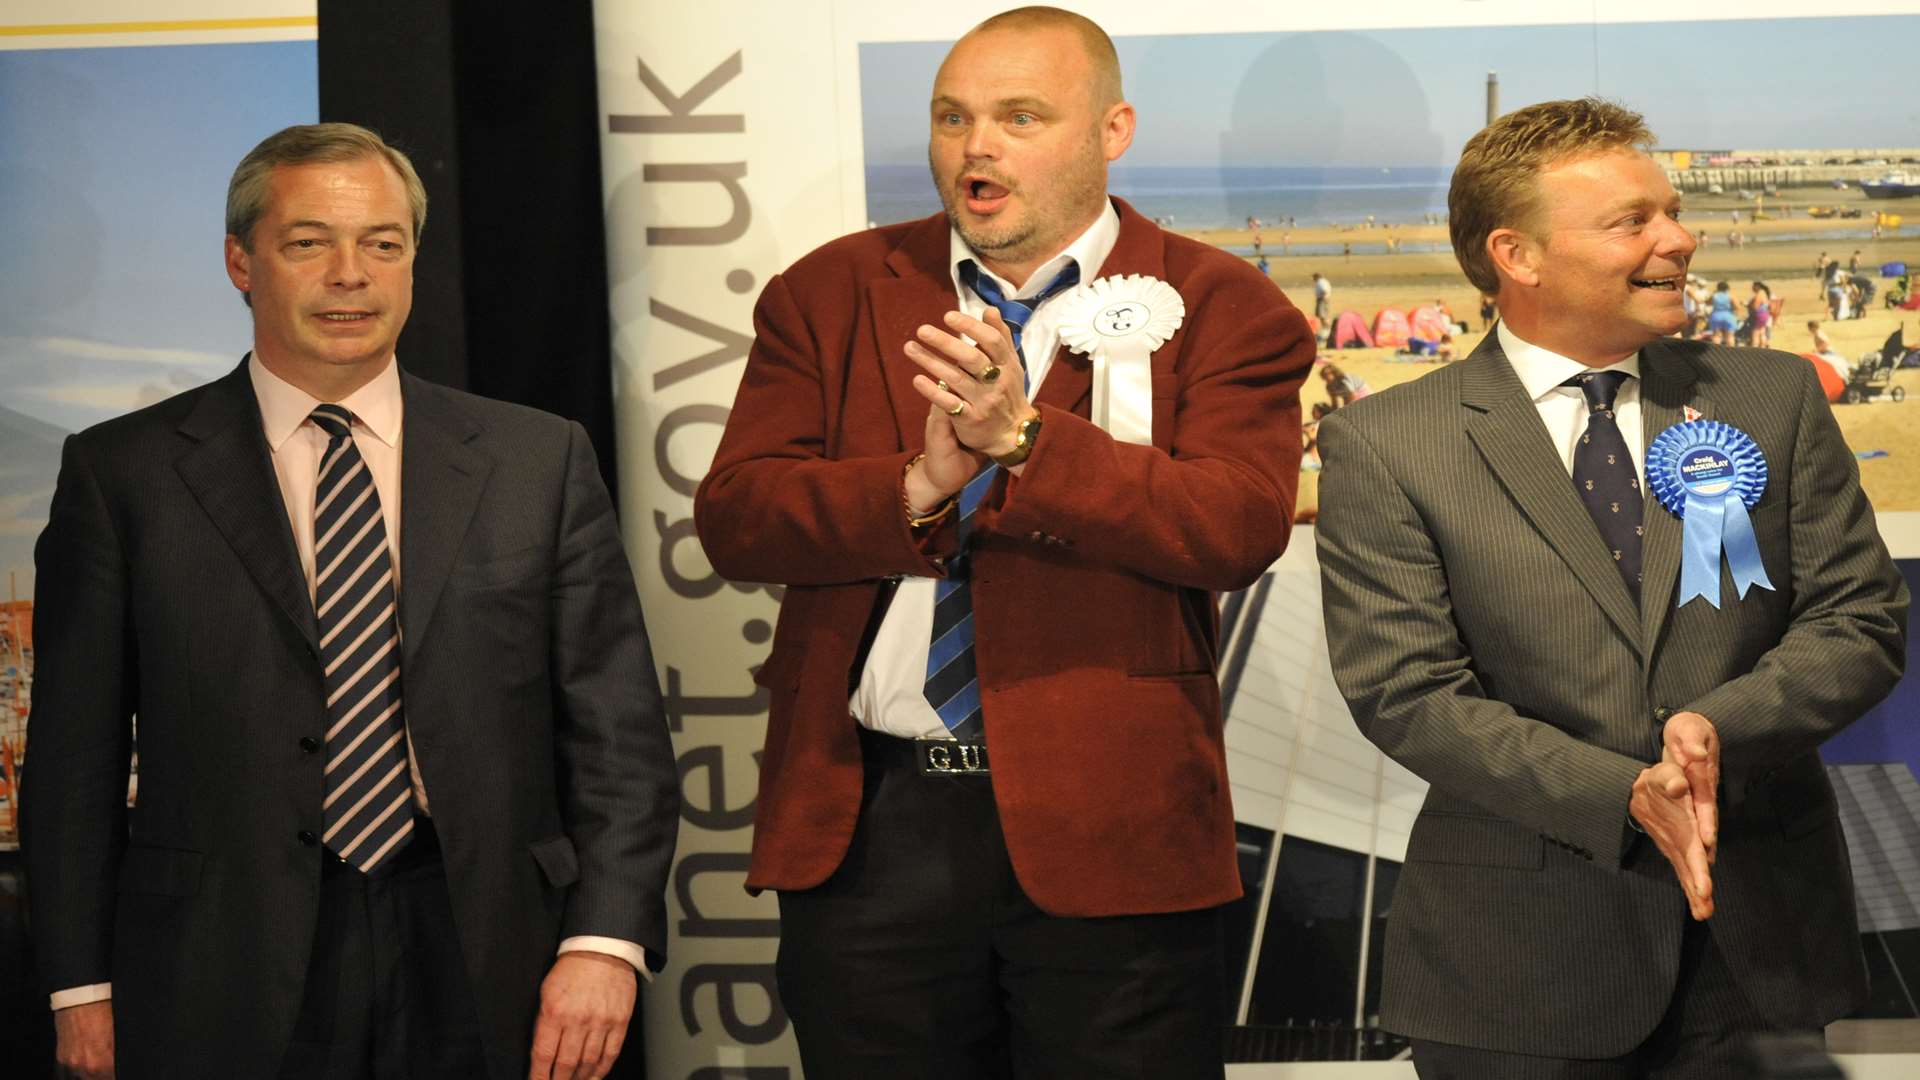 The moment Craig Mackinlay won the South Thanet seat